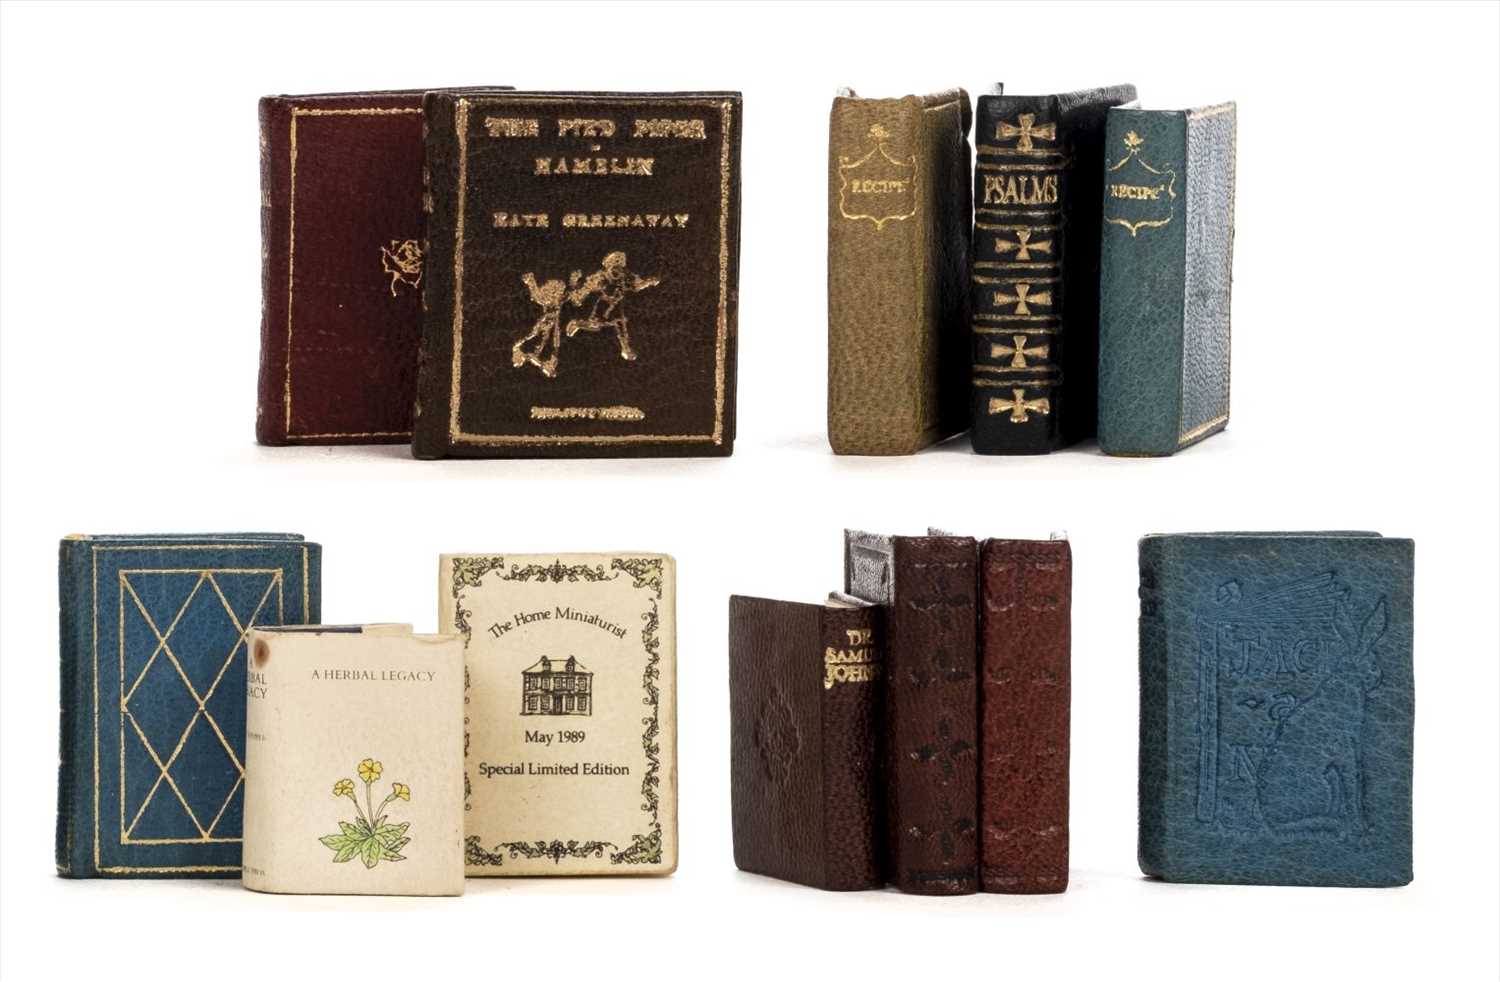 Lot 568 - Miniature books. A collection of miniature books published by the Lilliput Press, 1985-1991